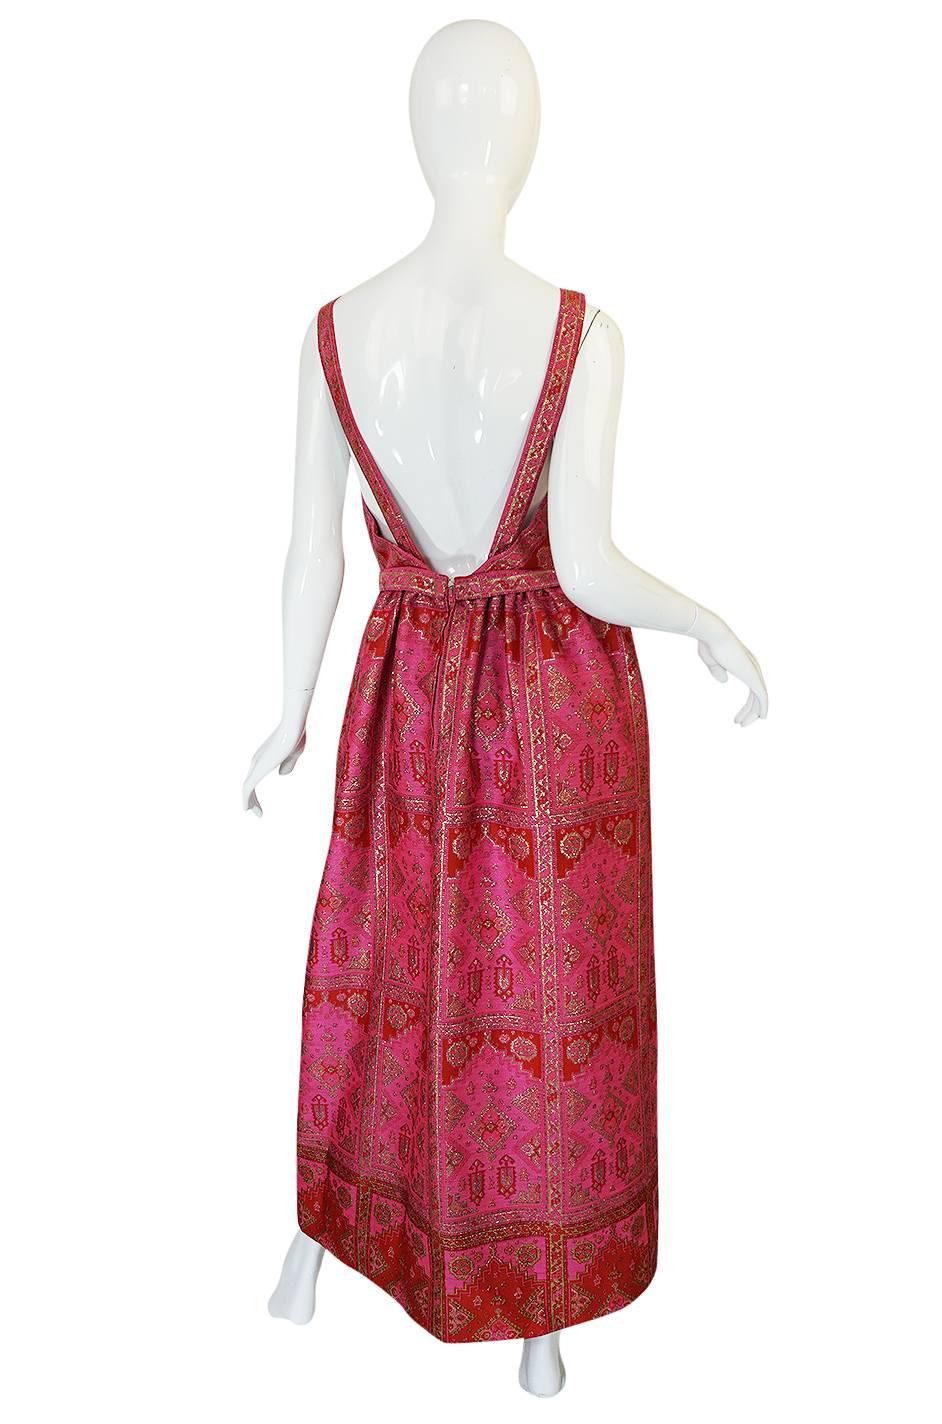 This stunning gown has no labels but feels like a label piece in its construction. It is definitely a higher end piece and a beautiful from this time period. It is made from a fabulous pink brocade that has a gold thread worked through the pattern